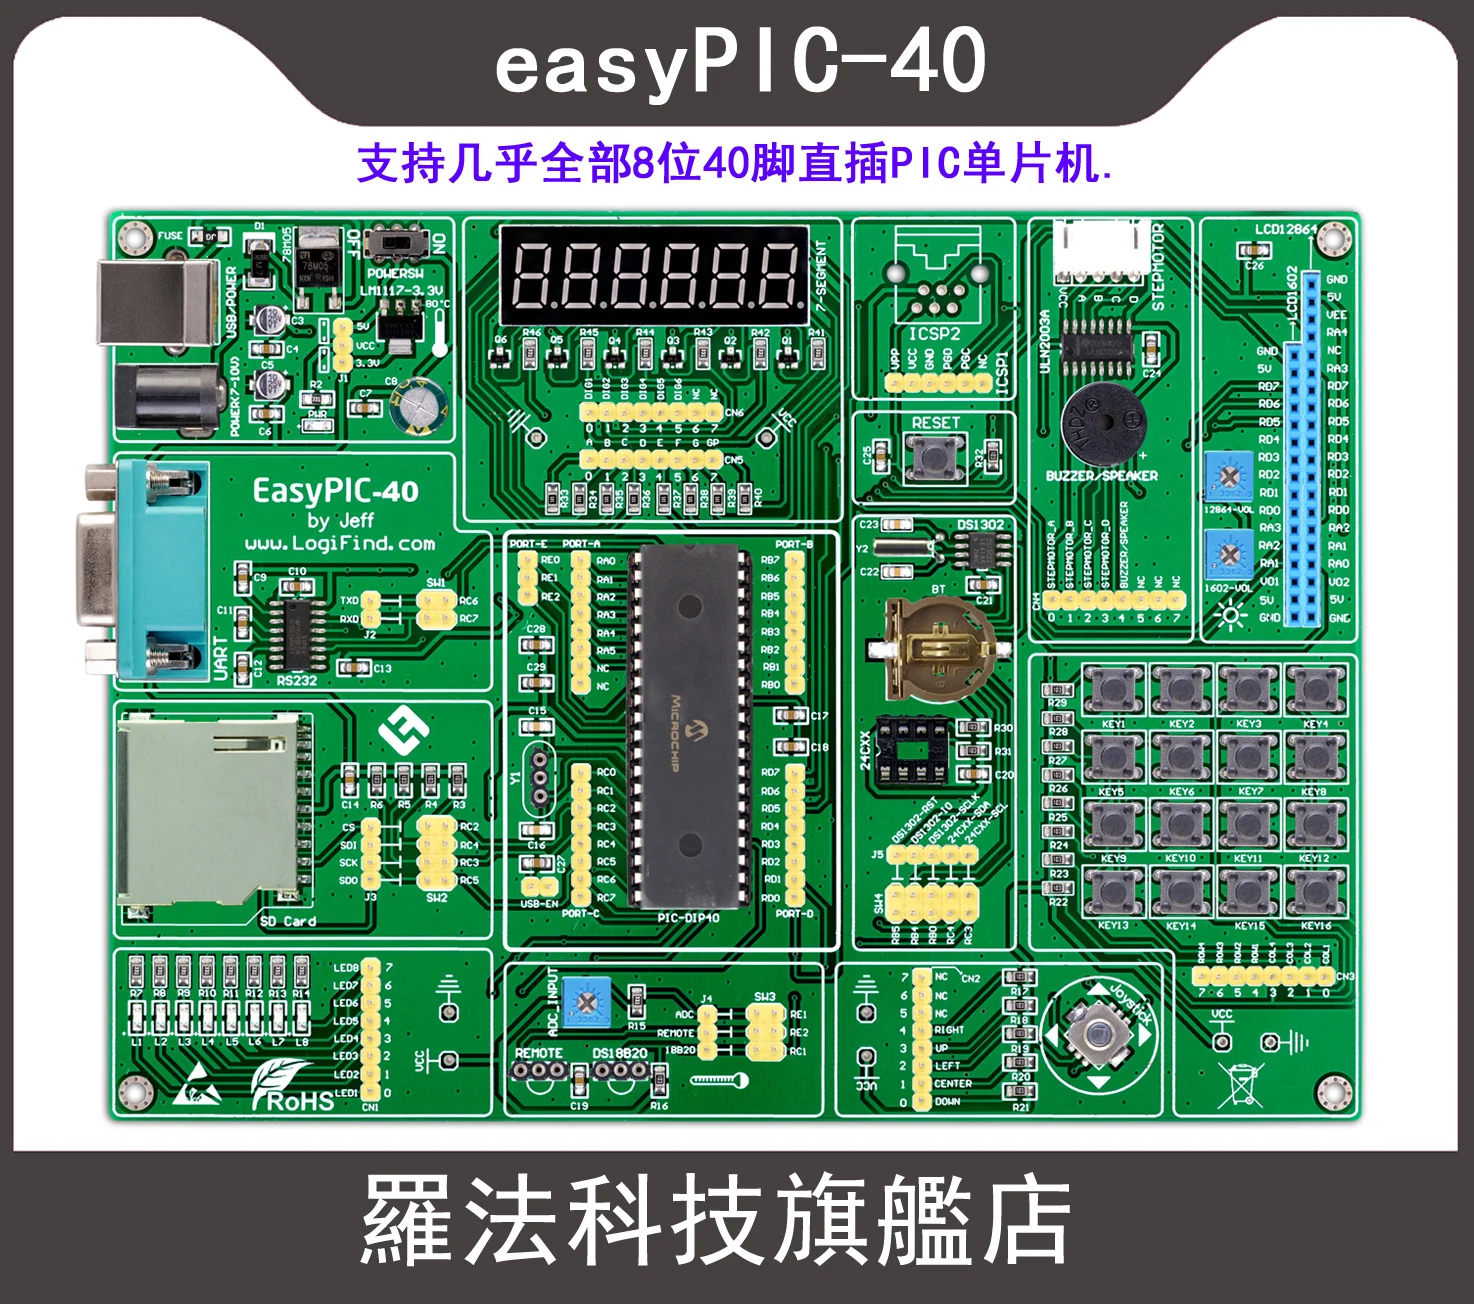 

PIC MCU Learning and Development Board Easypic-40 with Pic18f4550 Chip Routines